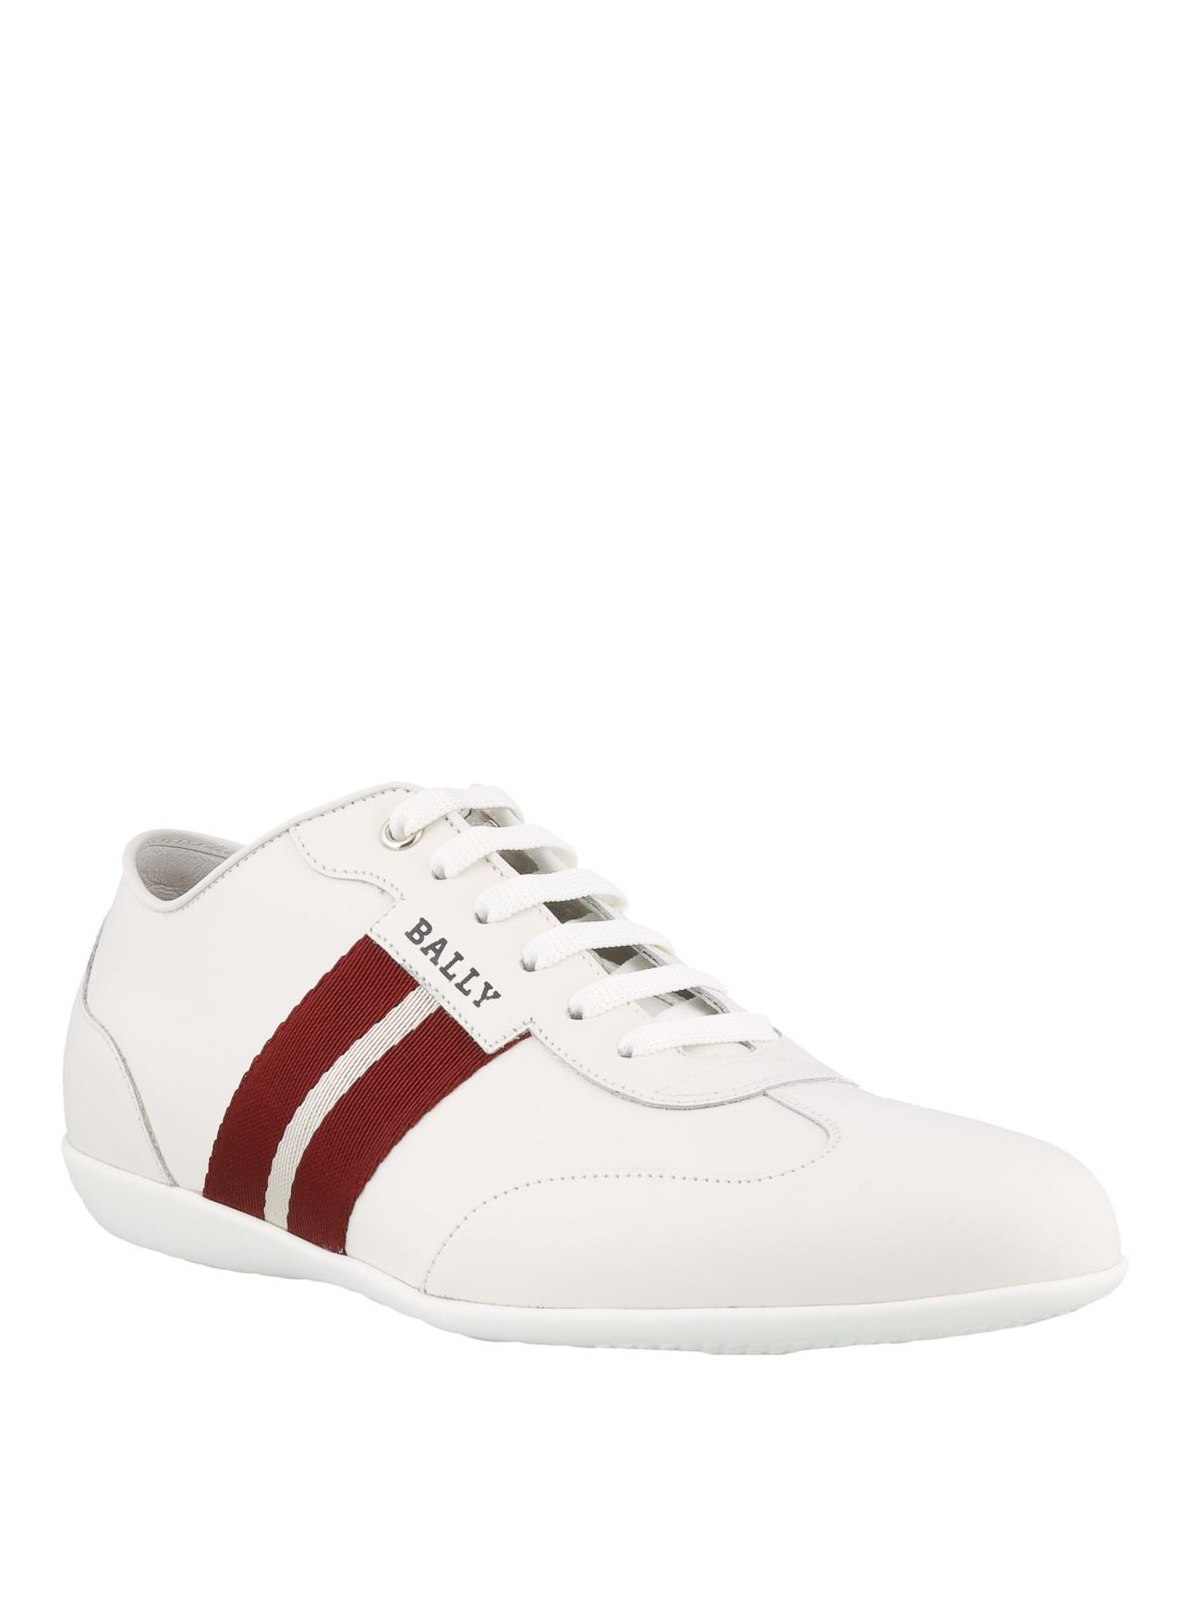 Trainers Bally - Harlam white leather sneakers - 6223132 | iKRIX.com